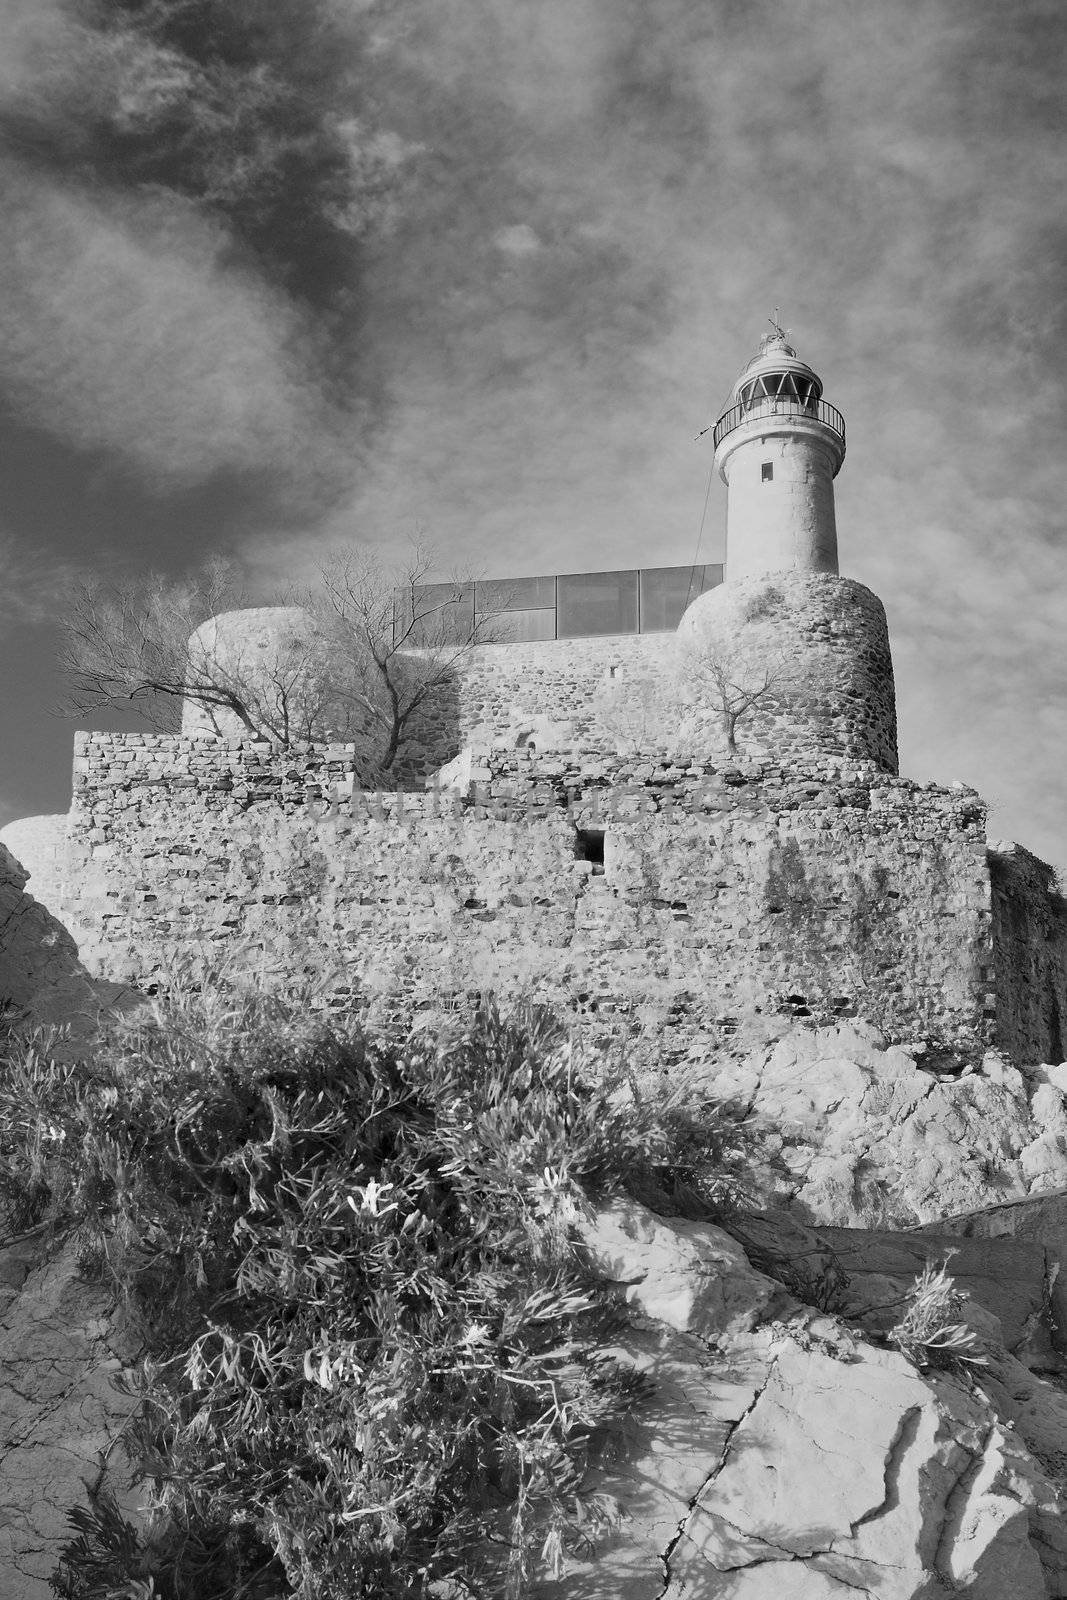 image of a lighthouse in castro urdiales, spain